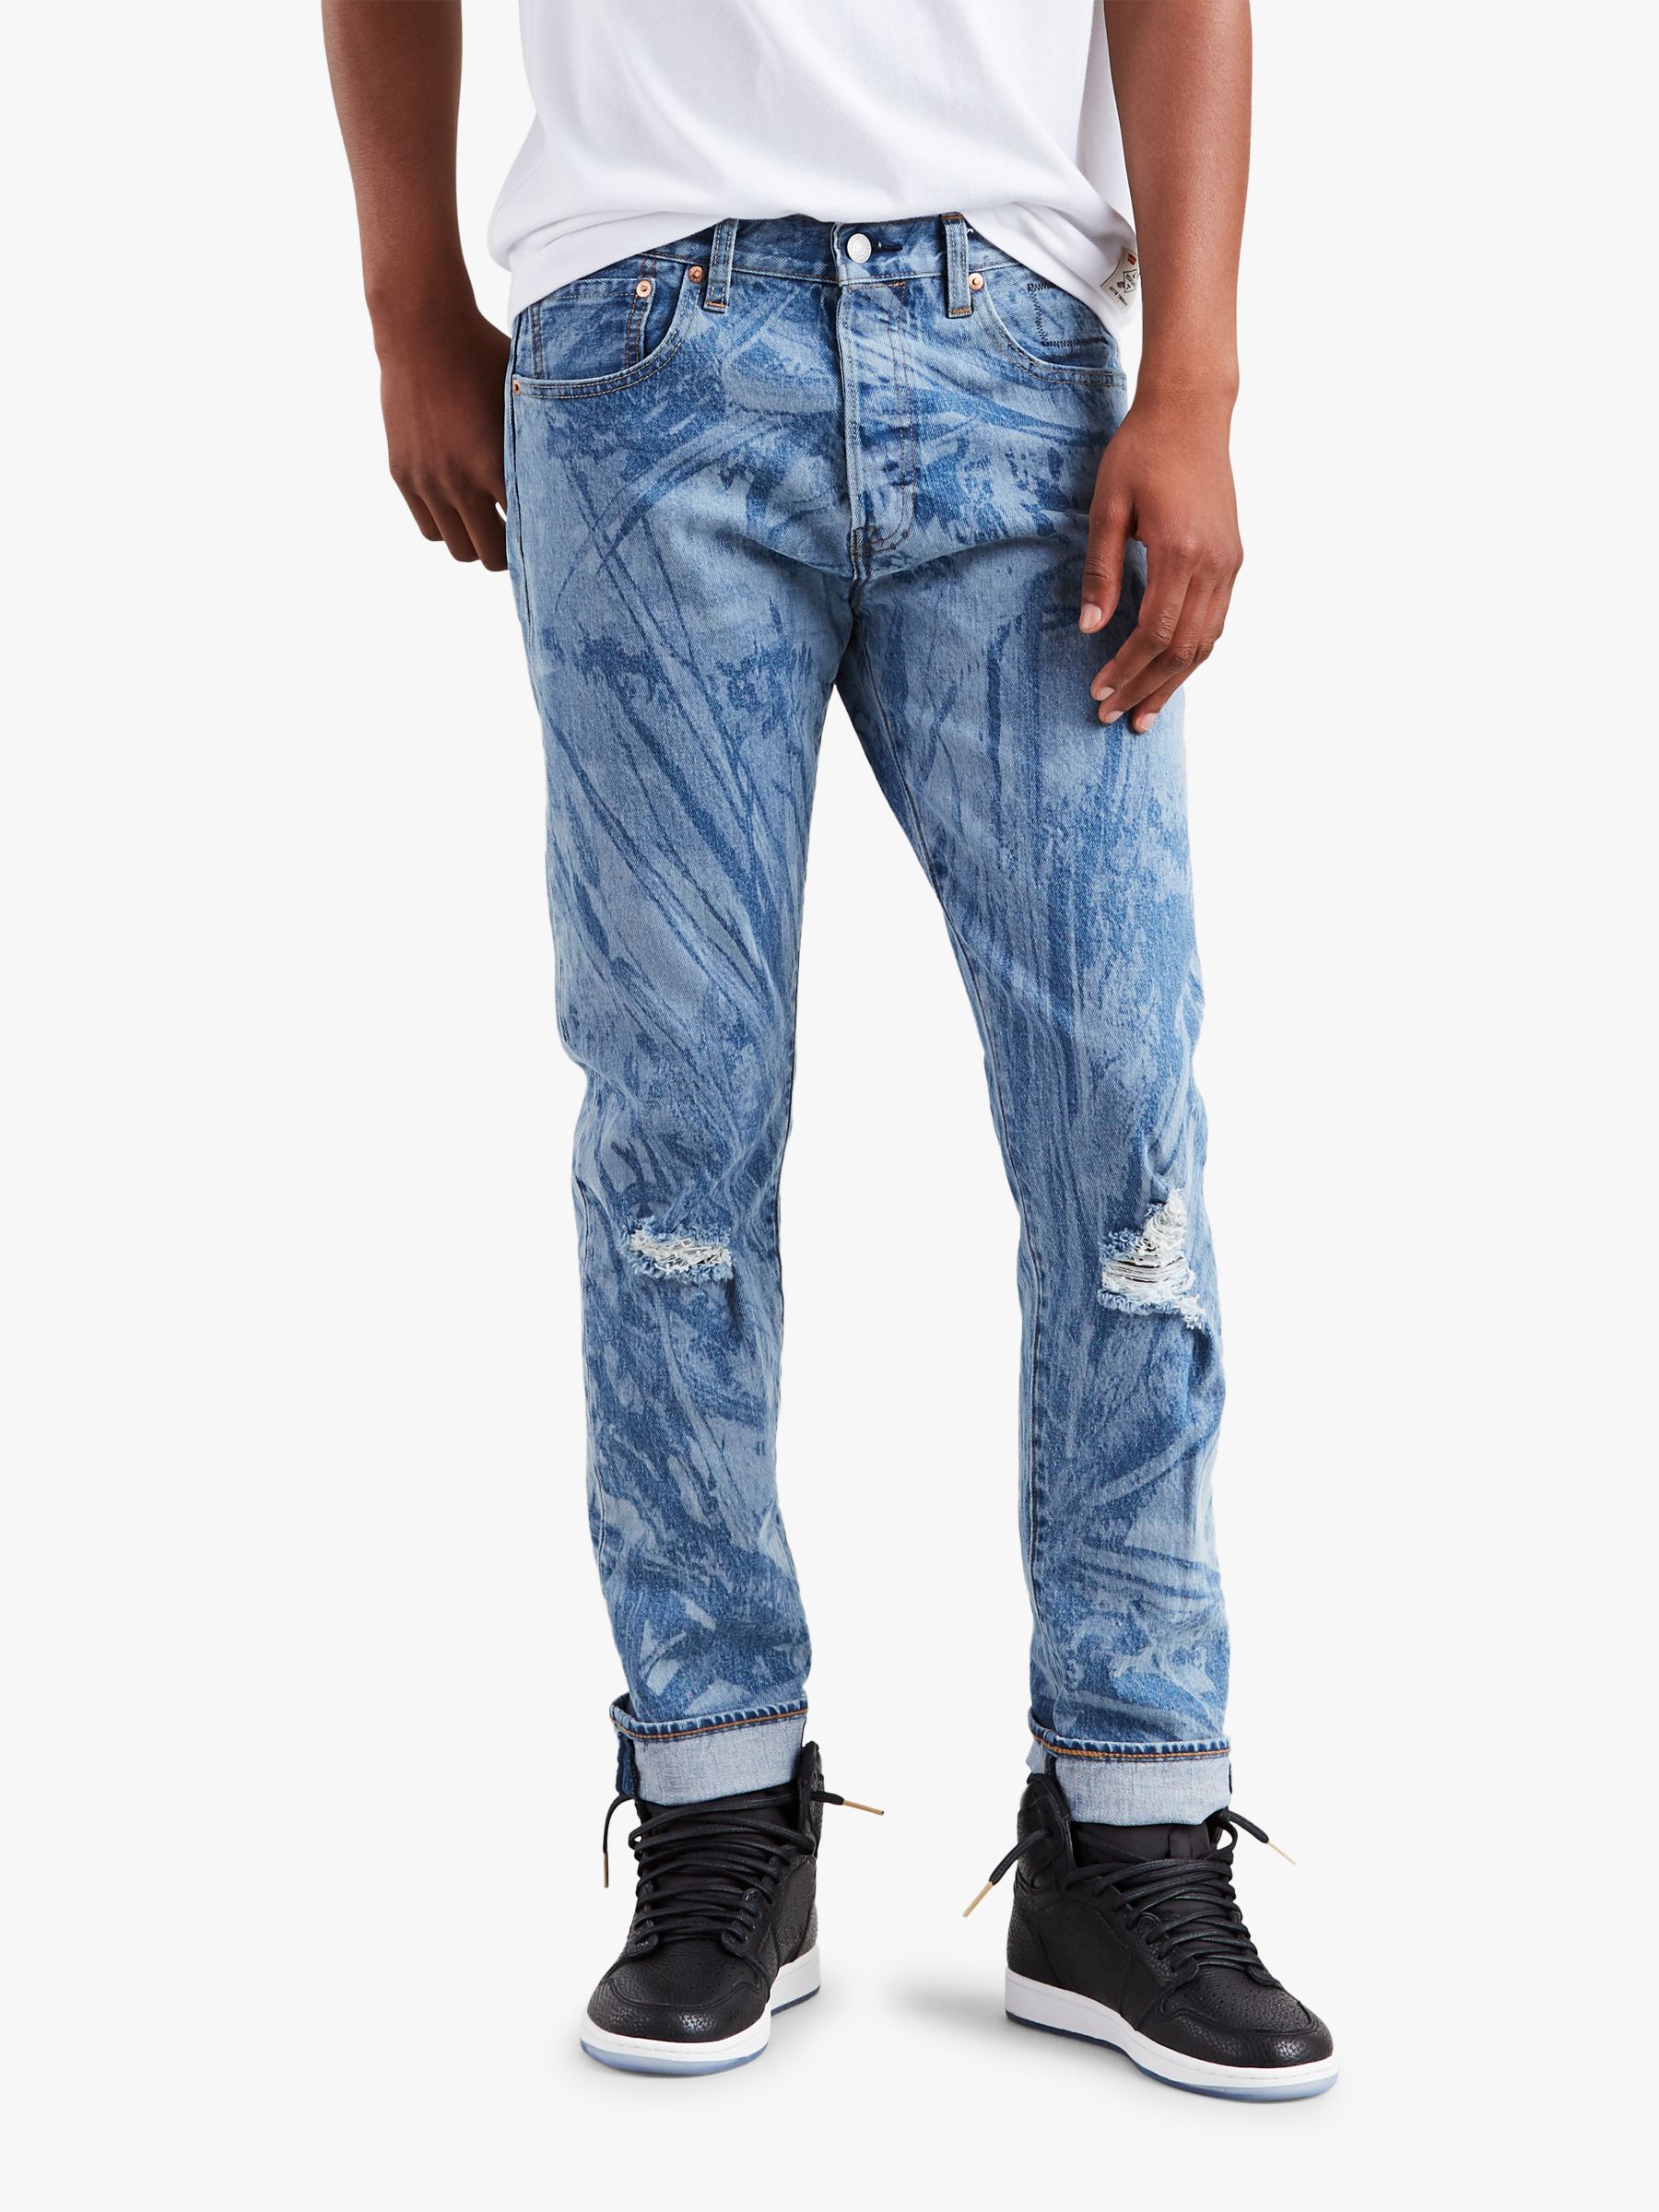 ripped 501 levis